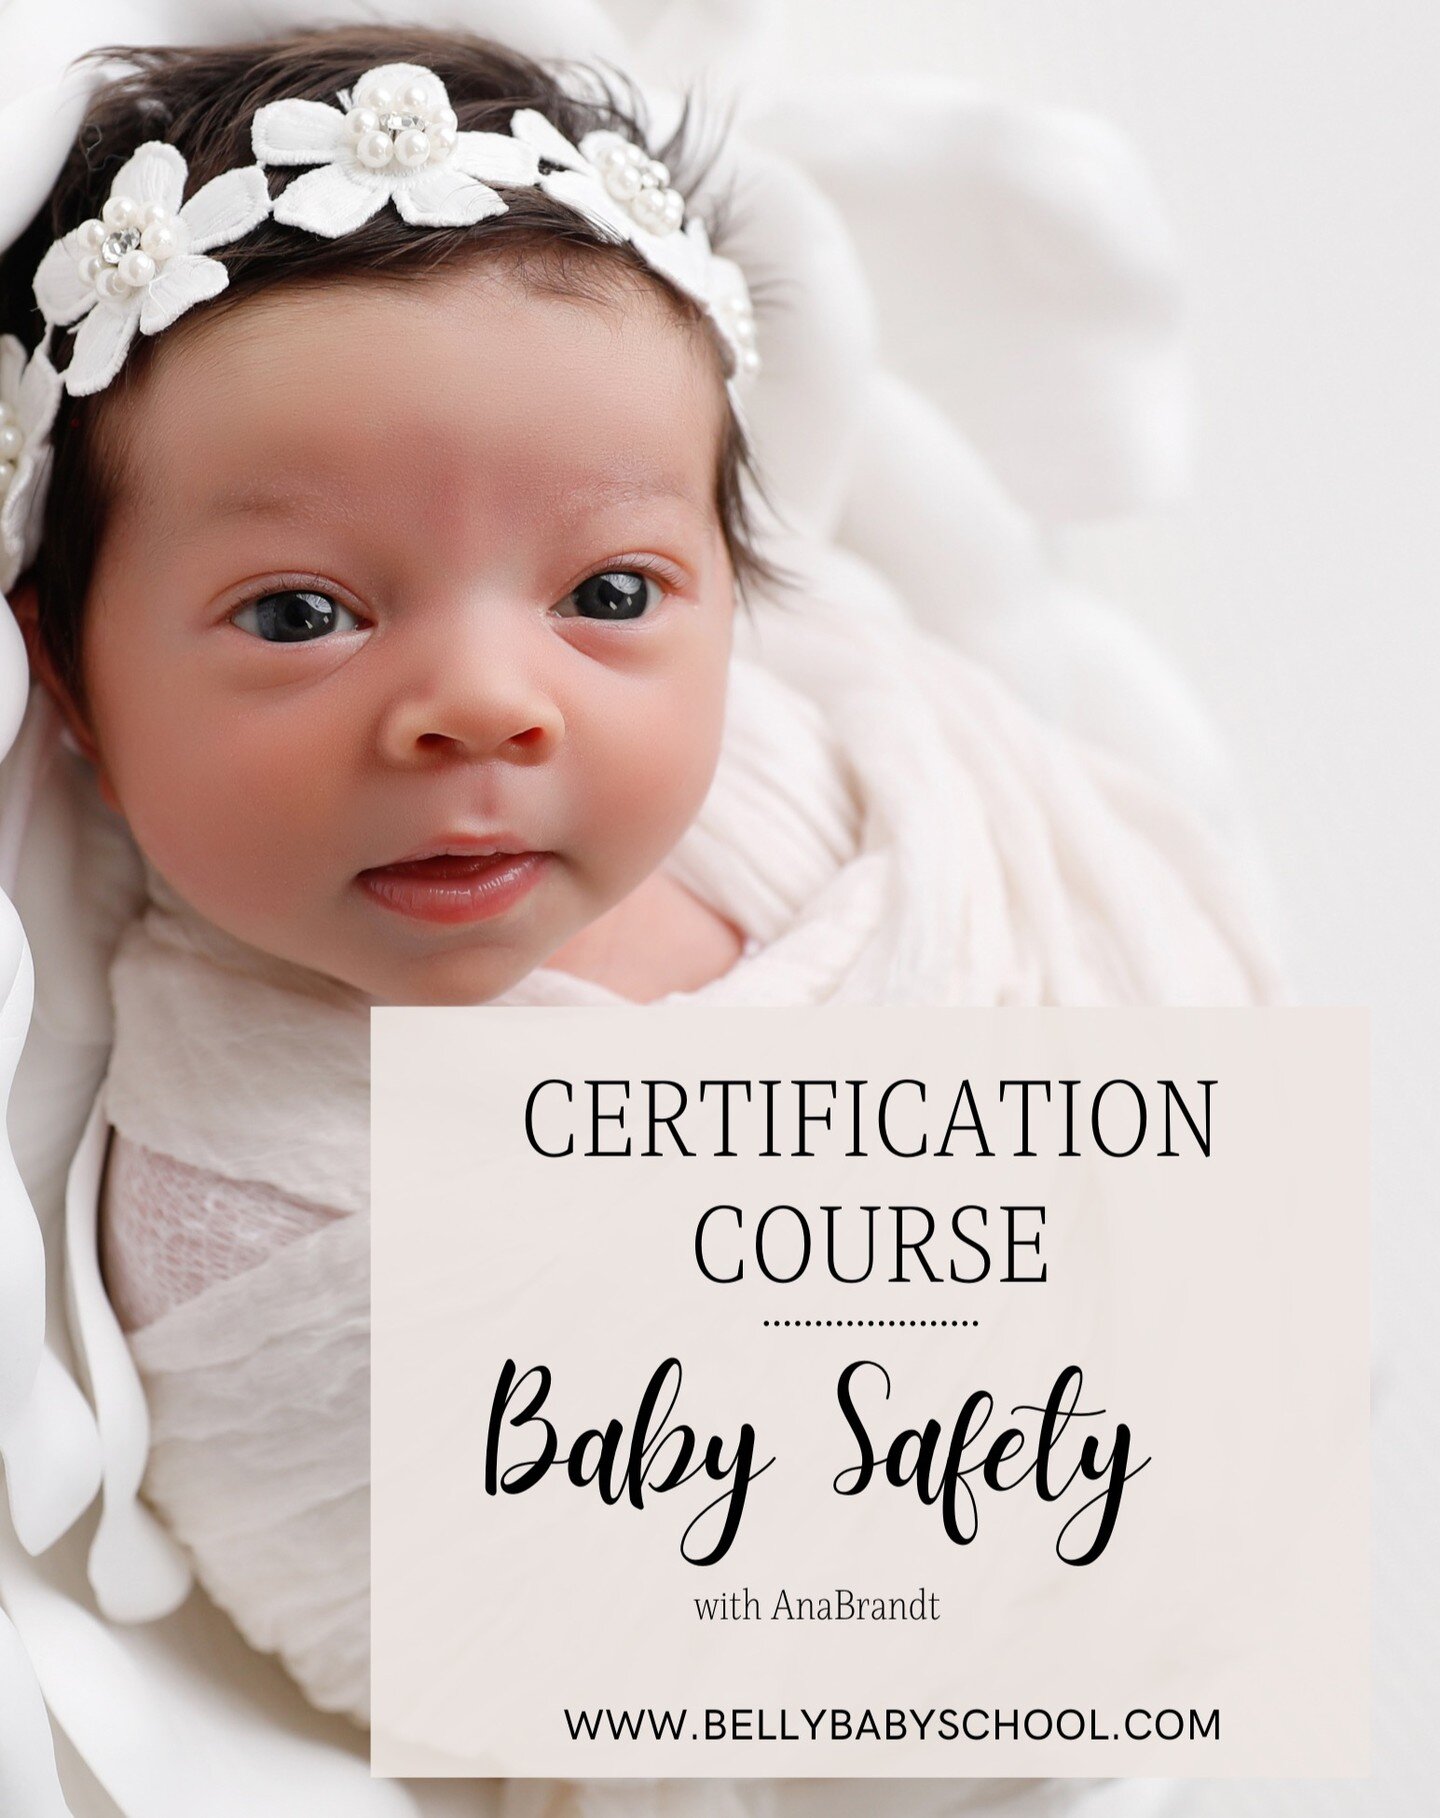 I can't believe we haven't done this but I think its time...if you are a member of Ana Brandt or BellyBabySchool this is included for you, if not and you need to signup see code below..launching next week with an safety exam and certification at the 